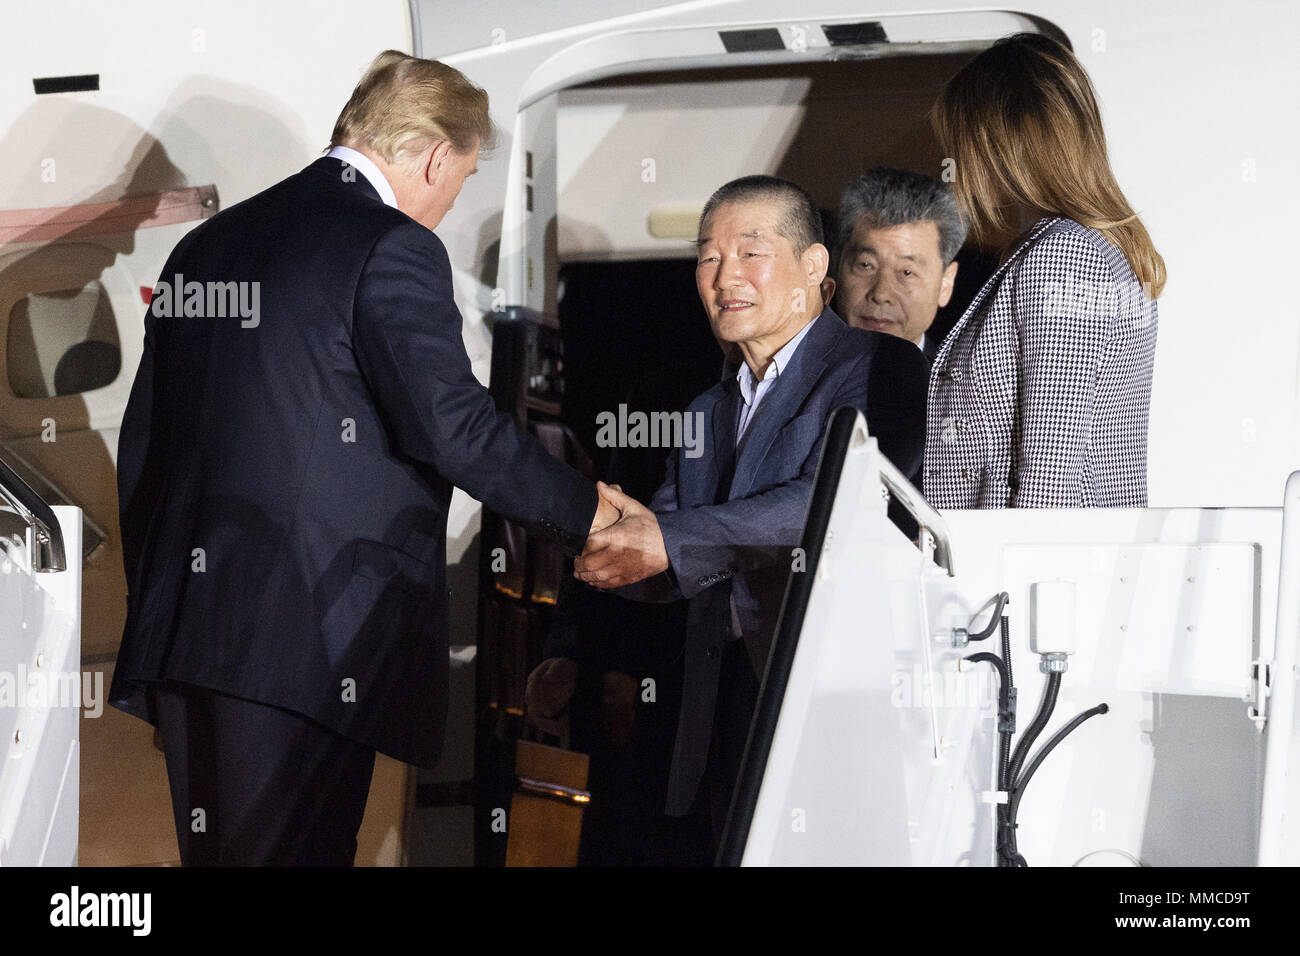 Suitland, Maryland, USA. 10th May, 2018. President DONALD TRUMP and his wife MELANIA TRUMP welcoming the three American detainees (KIM DONG-CHUL, KIM HAK-SONG, and TONY KIM) held in captivity in North Korea at Joint Base Andrews in Suitland, Maryland on May 10, 2018. Credit: Michael Brochstein/ZUMA Wire/Alamy Live News Stock Photo